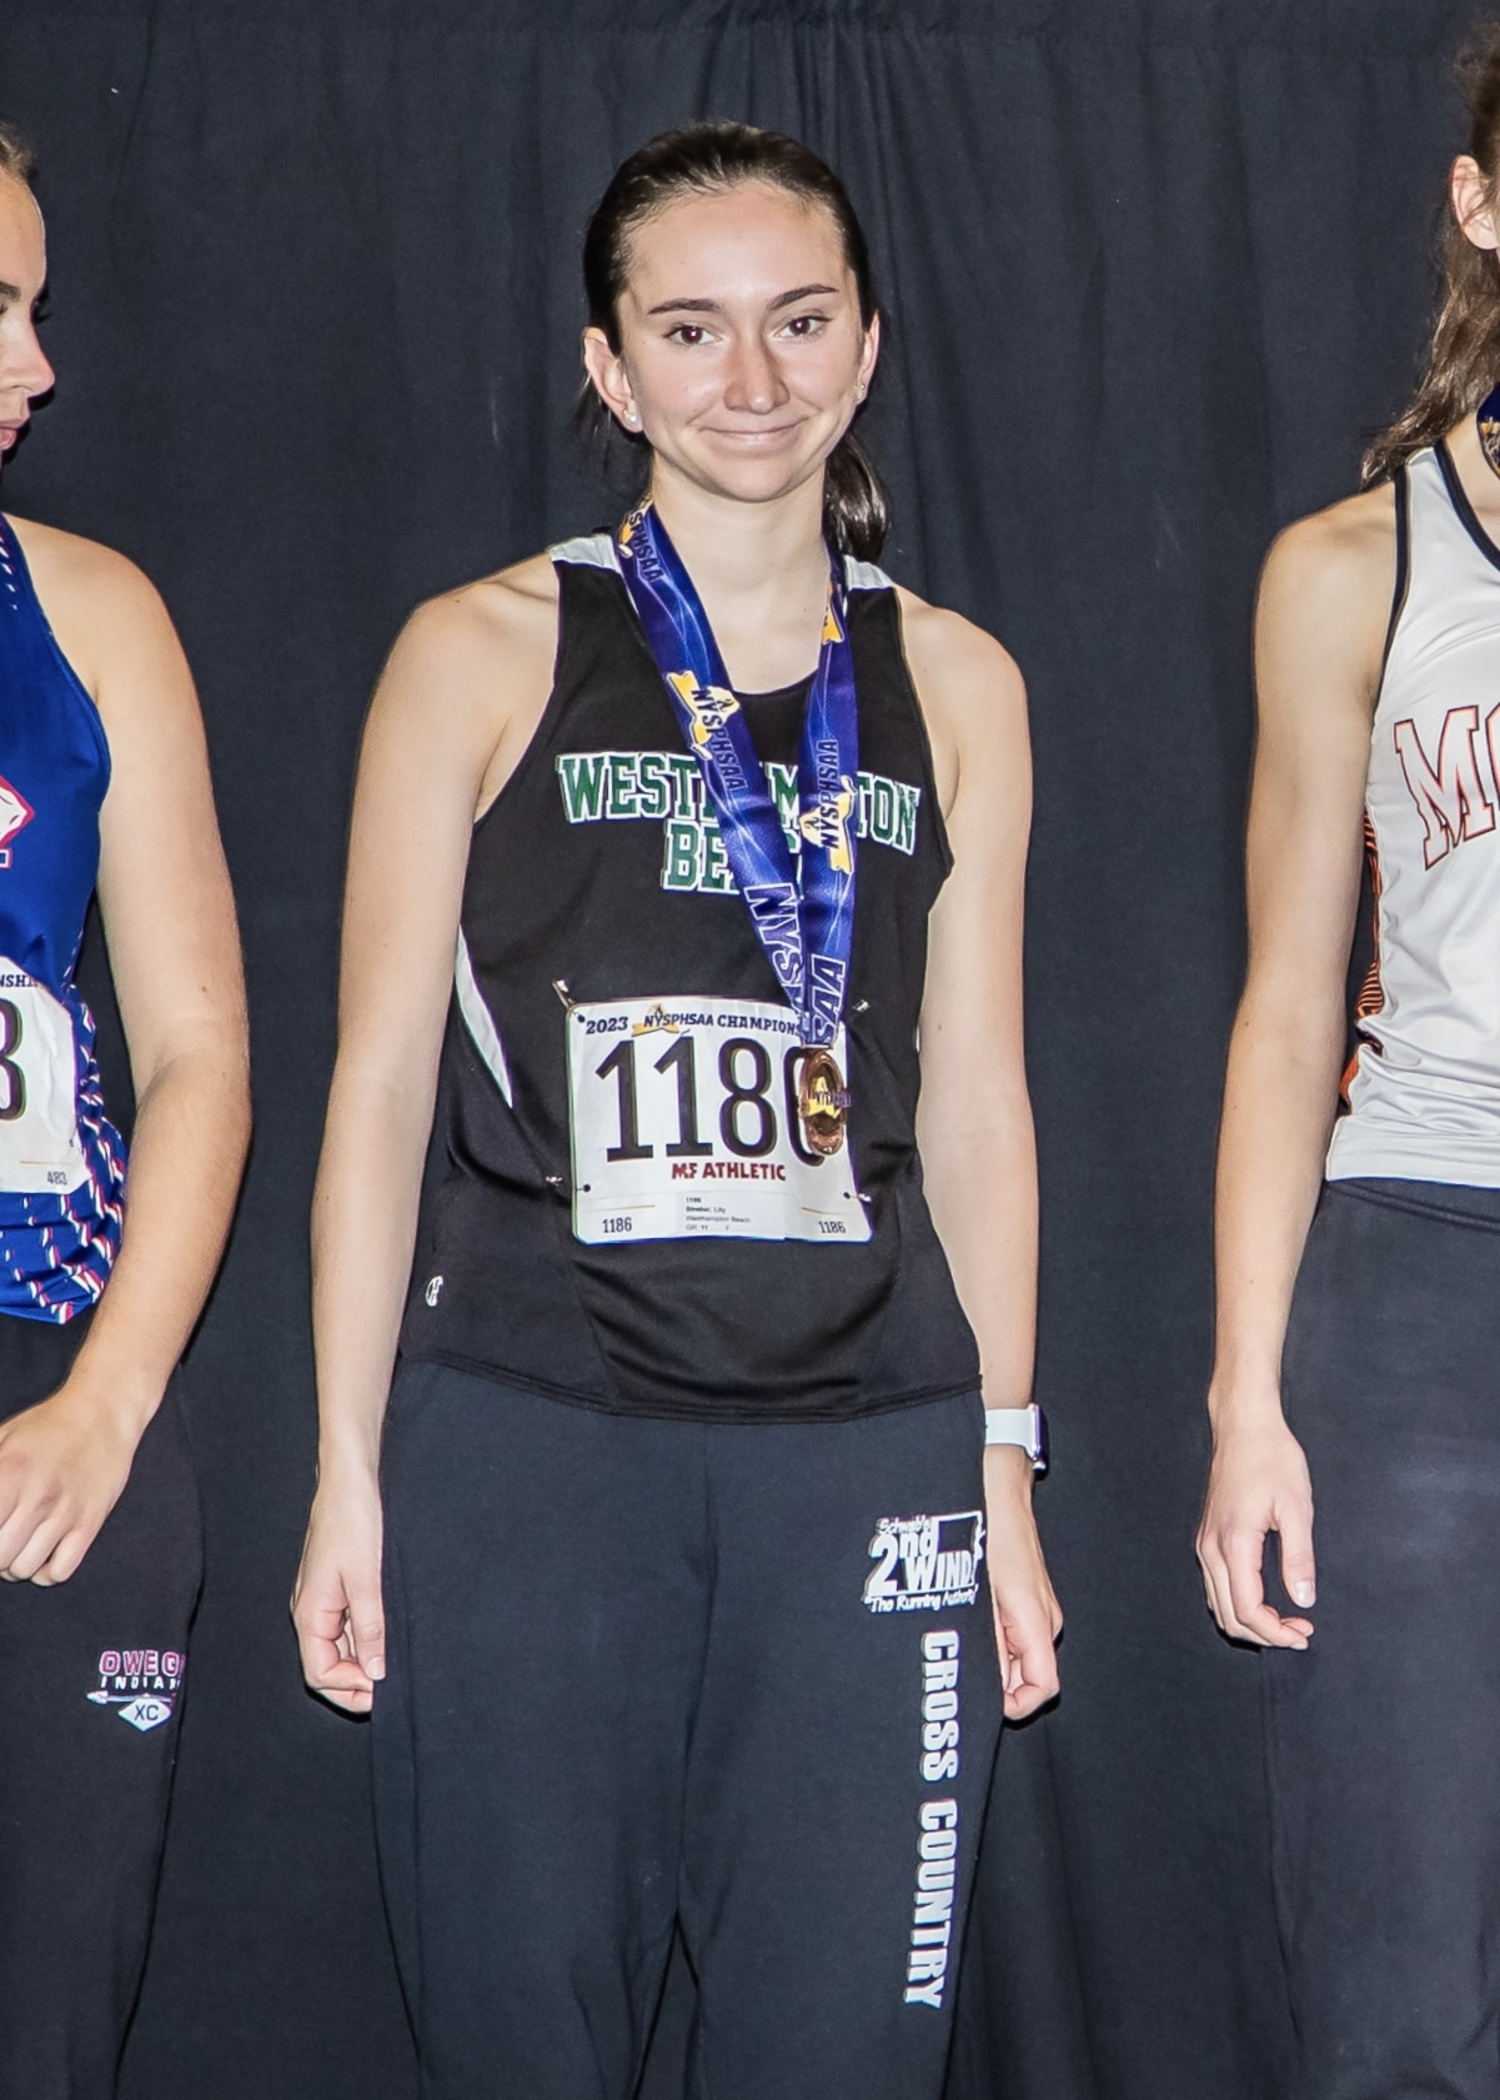 Westhampton Beach junior Lily Strebel earned a seventh-place finish at the Class B girls cross country state championship at Vernon Verona Sherrill High School November 11. BEYOND THE PRINT/DAVID WILLIAMS